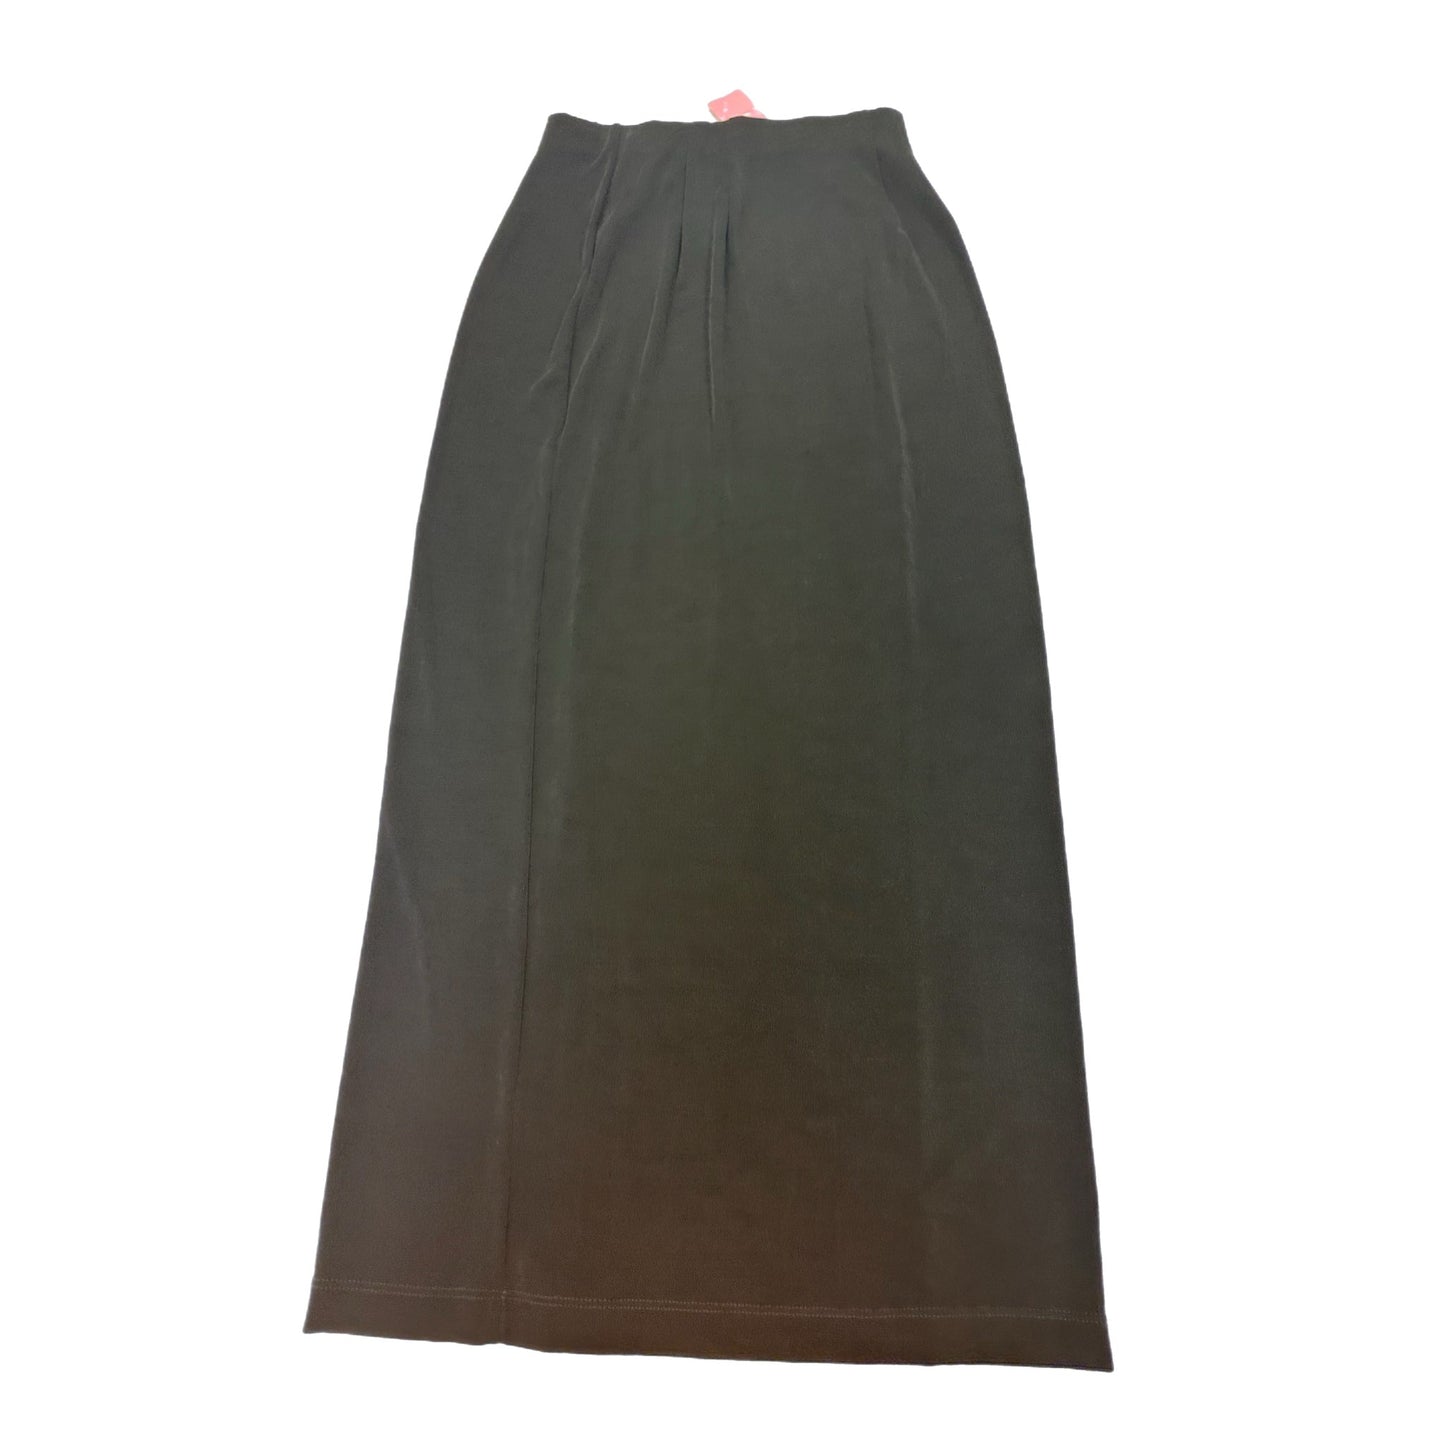 Skirt Maxi By Chicos  Size: 0 (4)